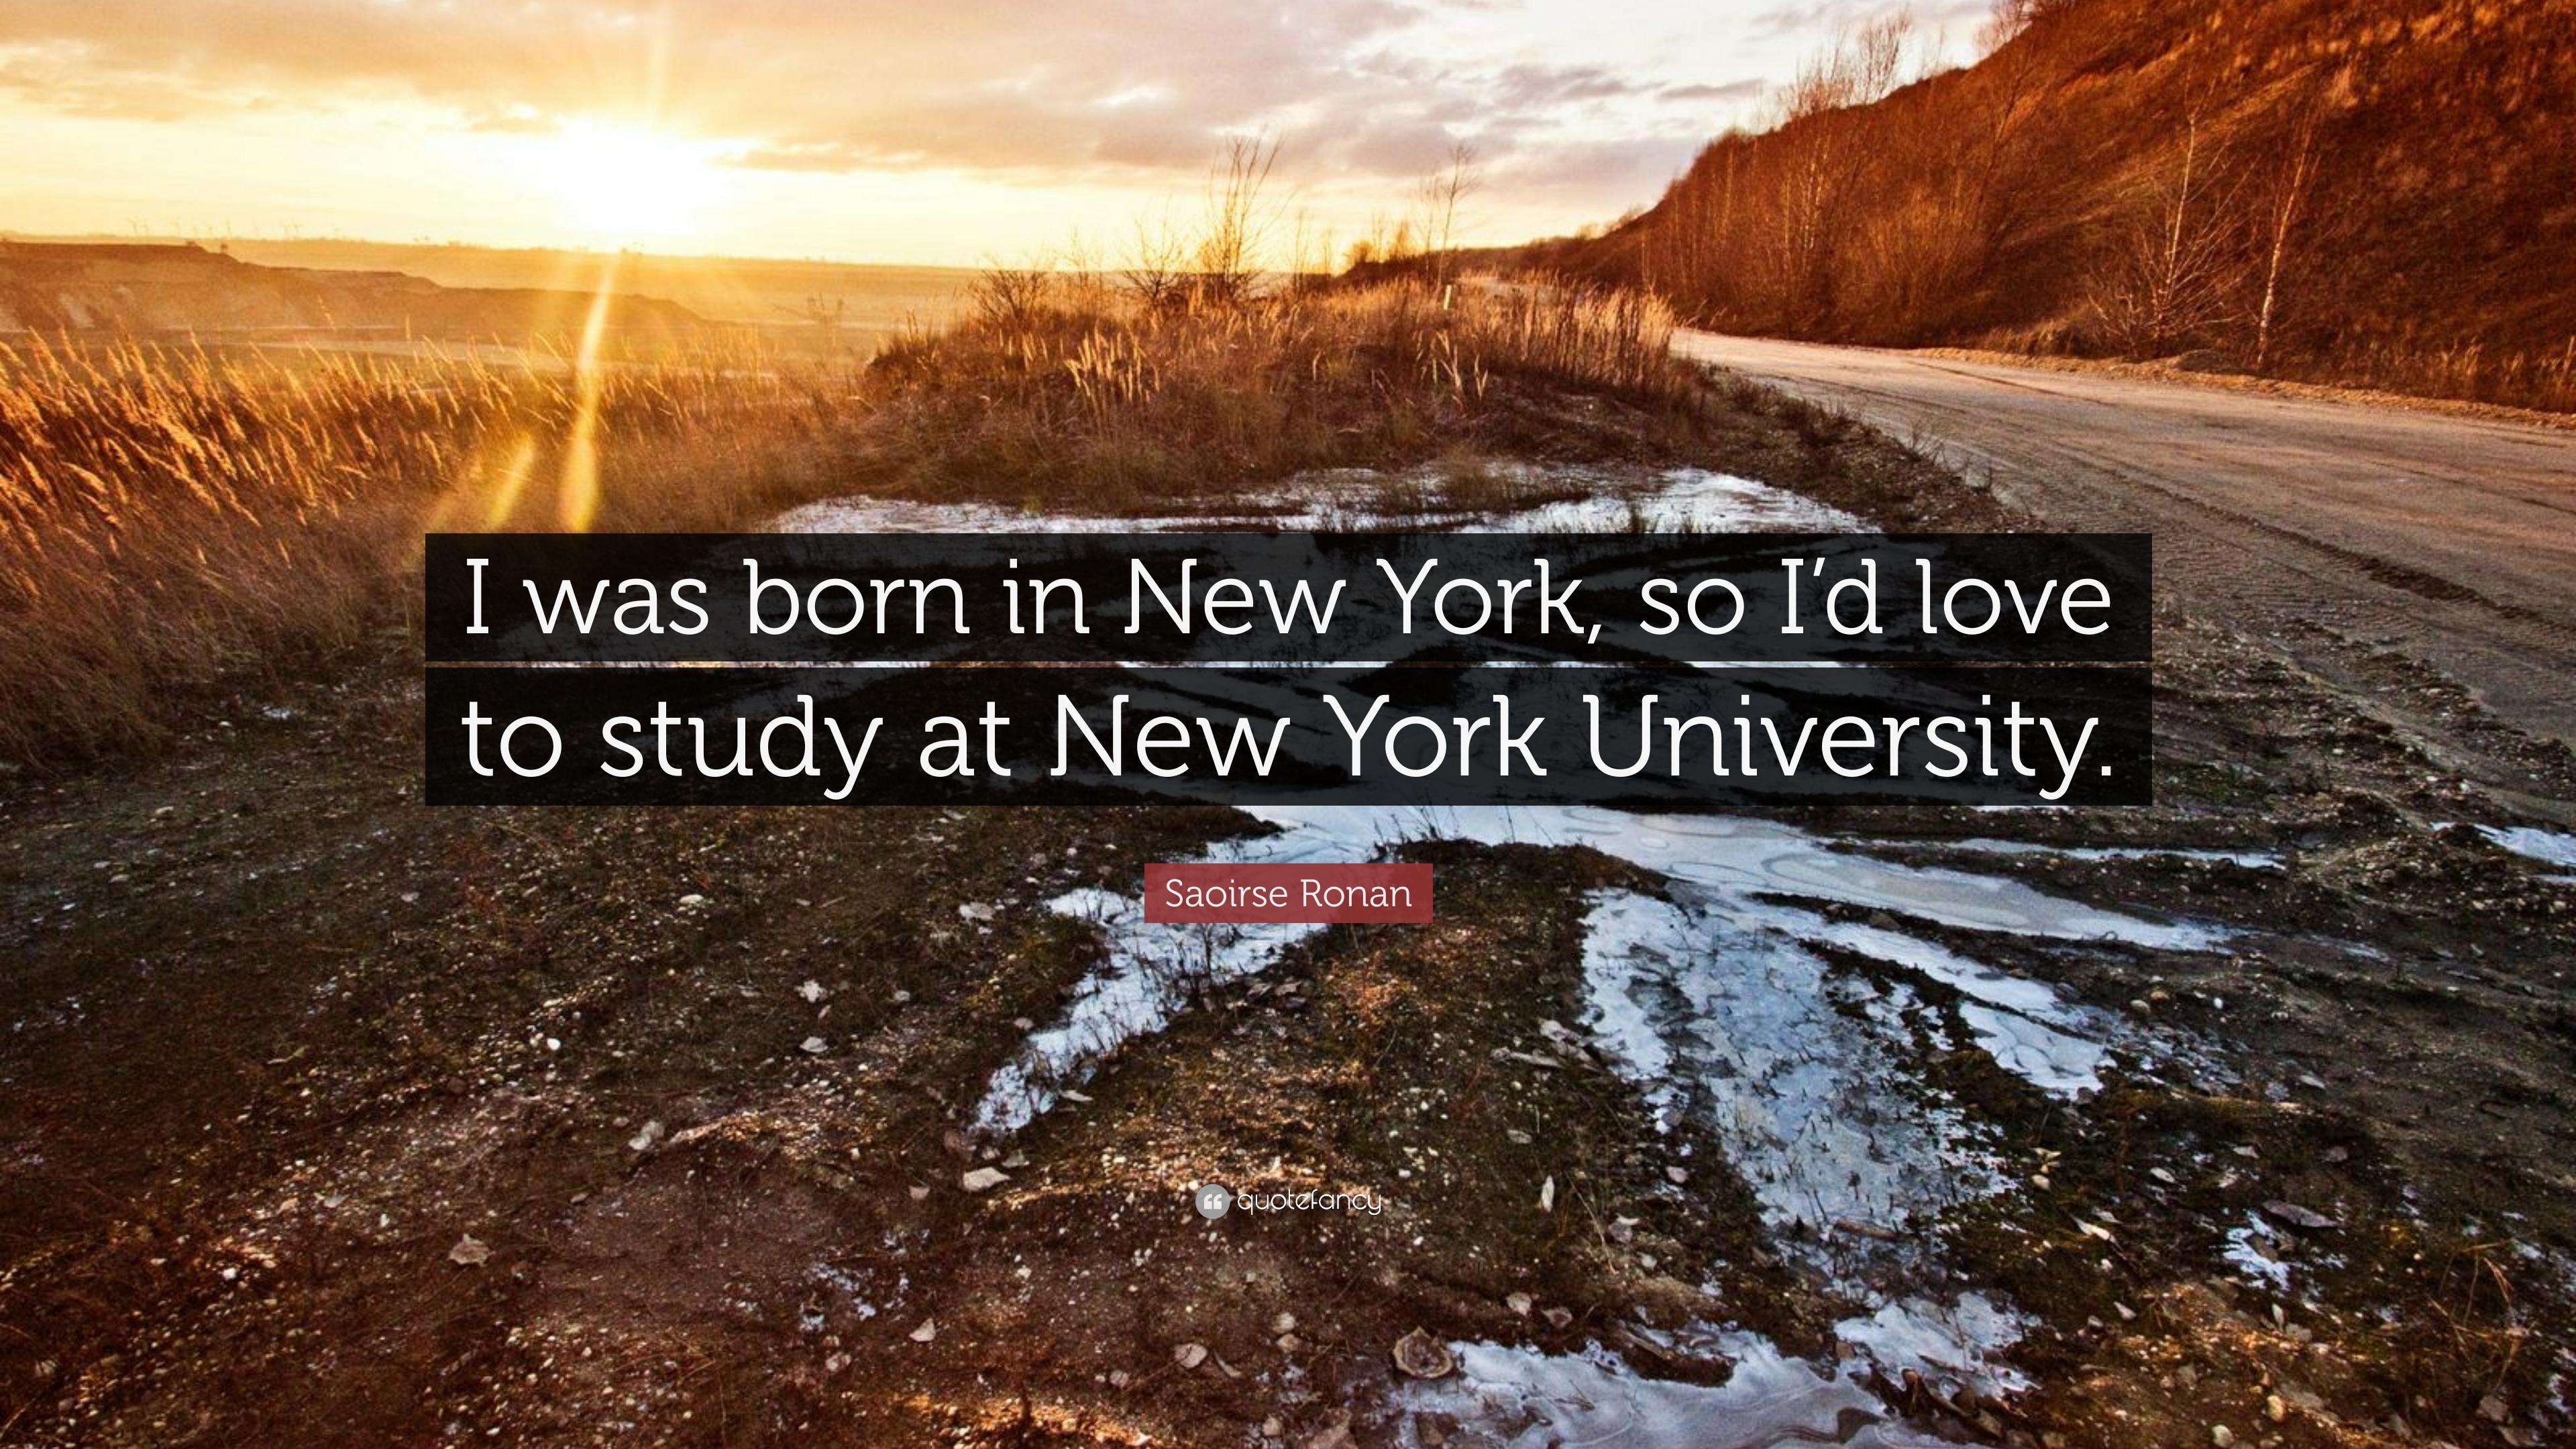 Saoirse Ronan Quote: “I was born in New York, so I'd love to study